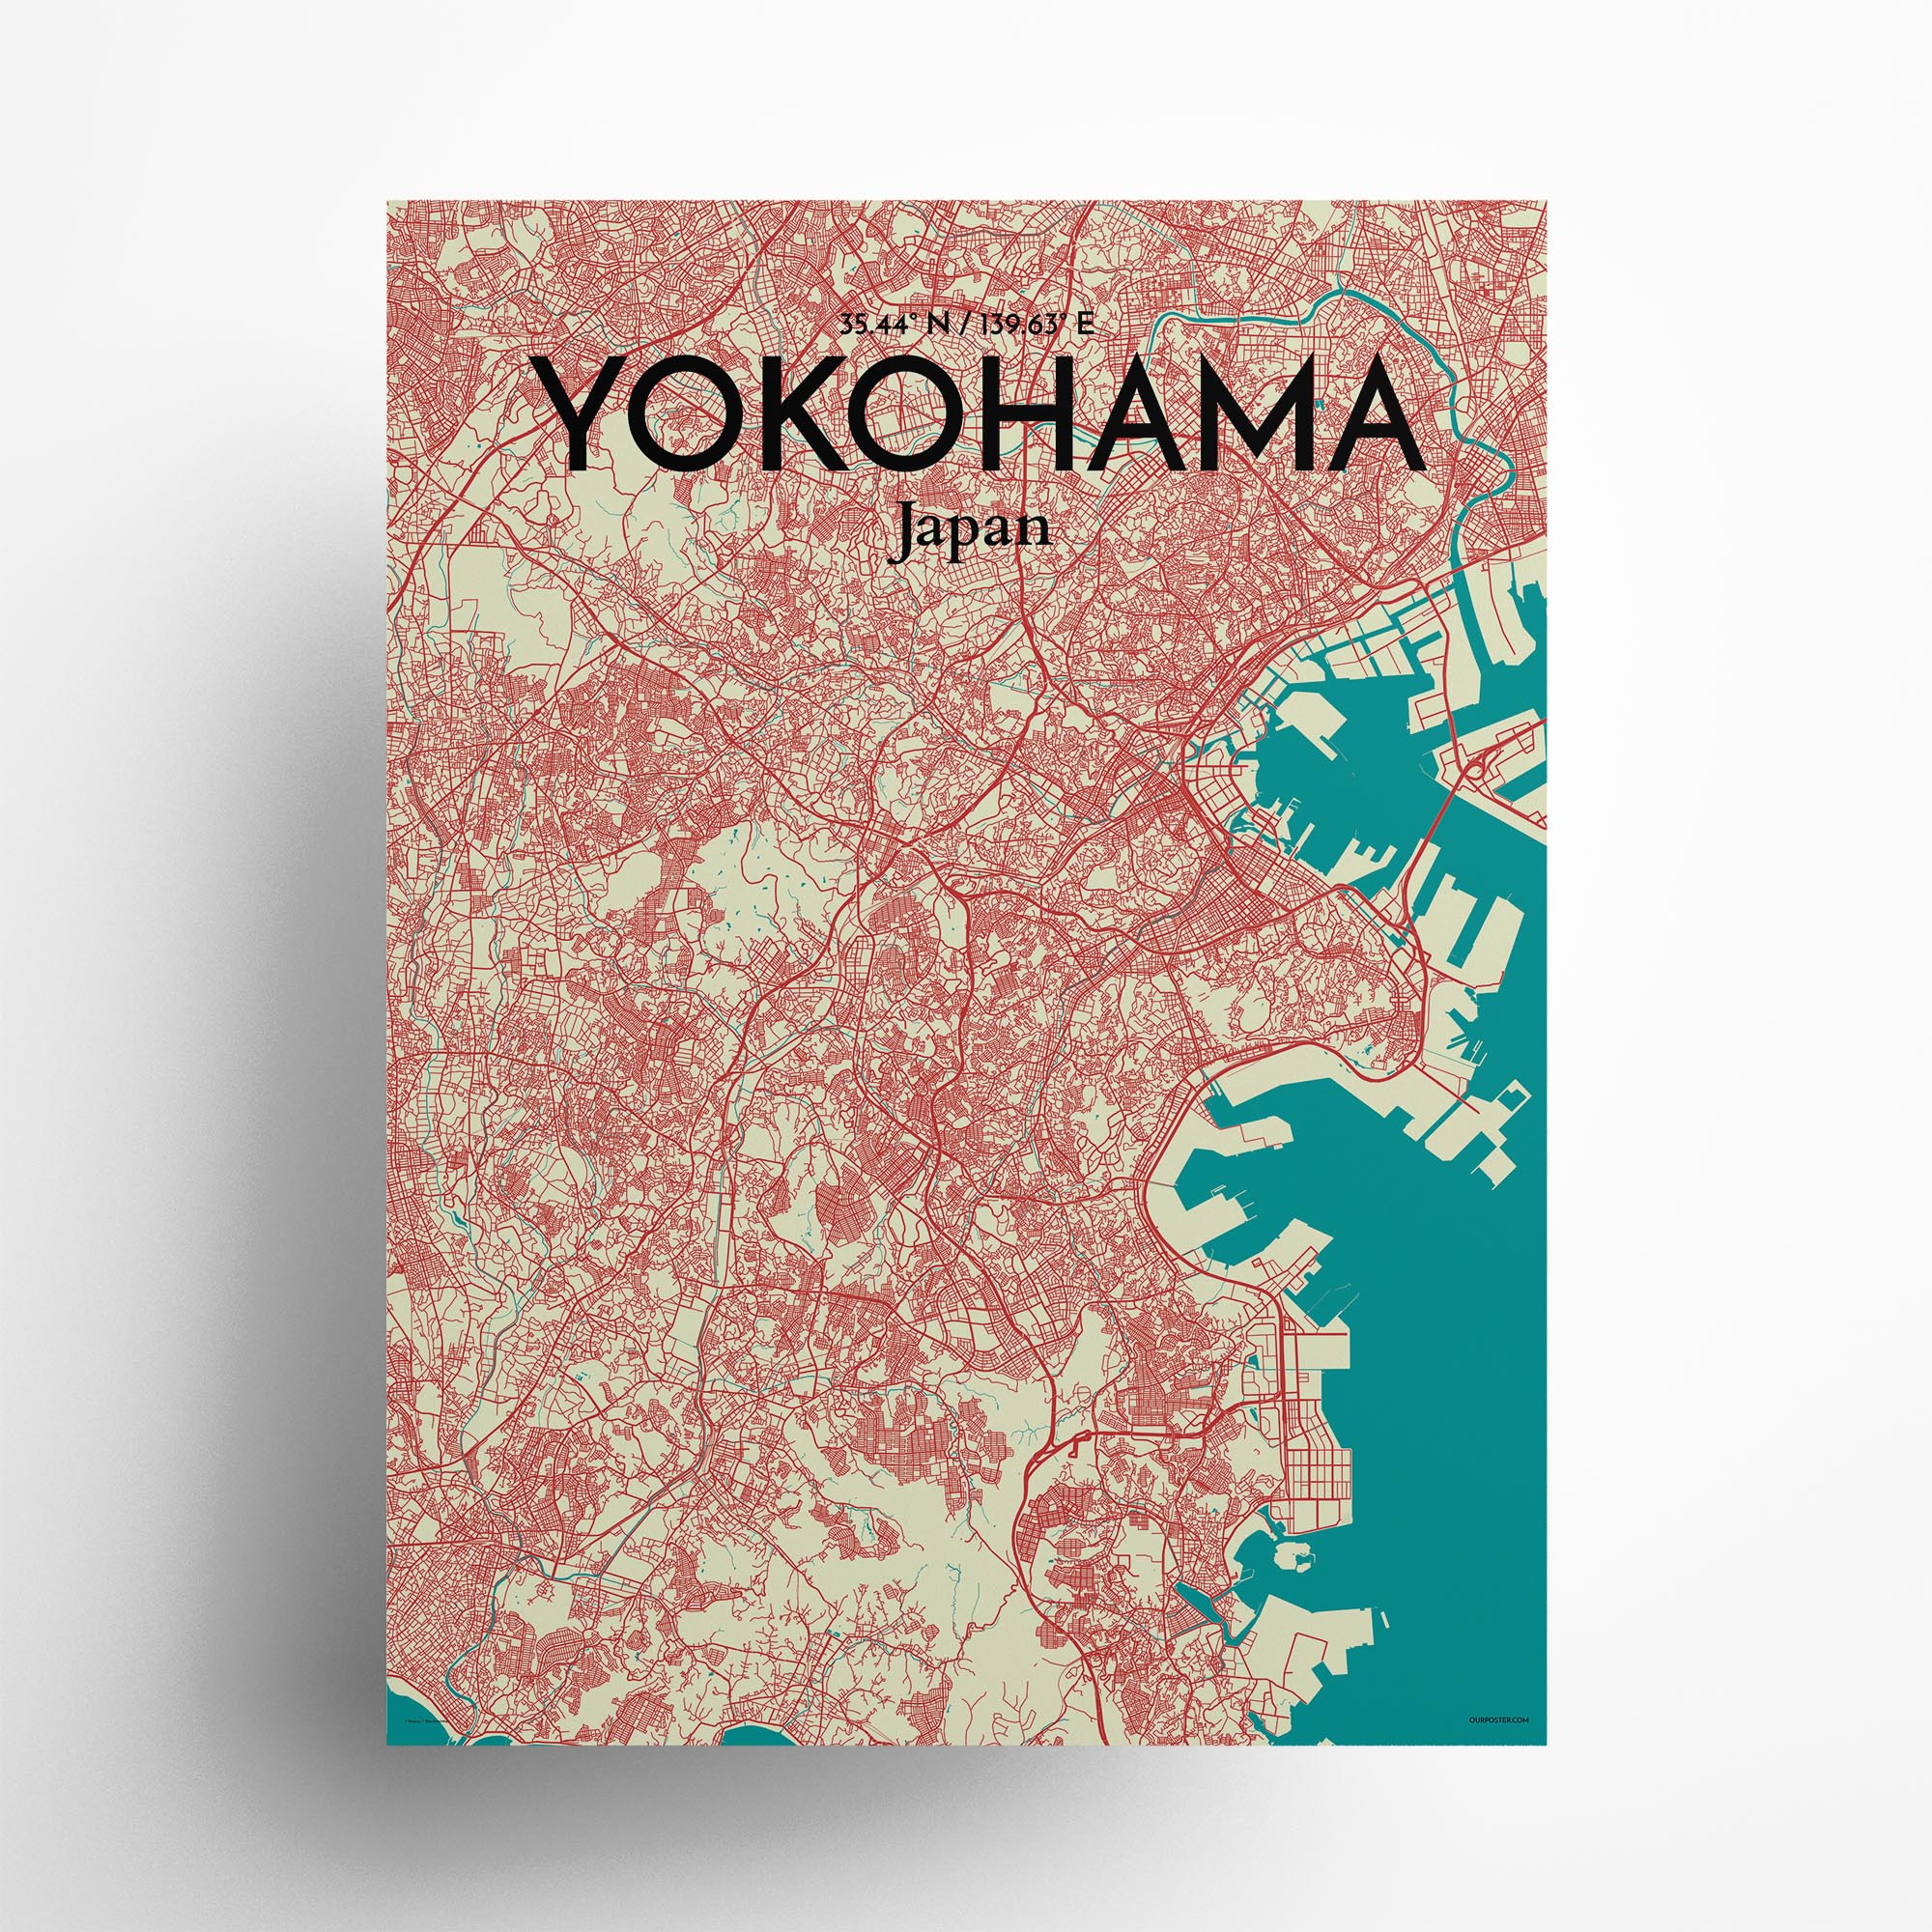 Yokohama city map poster in Tricolor of size 18" x 24"